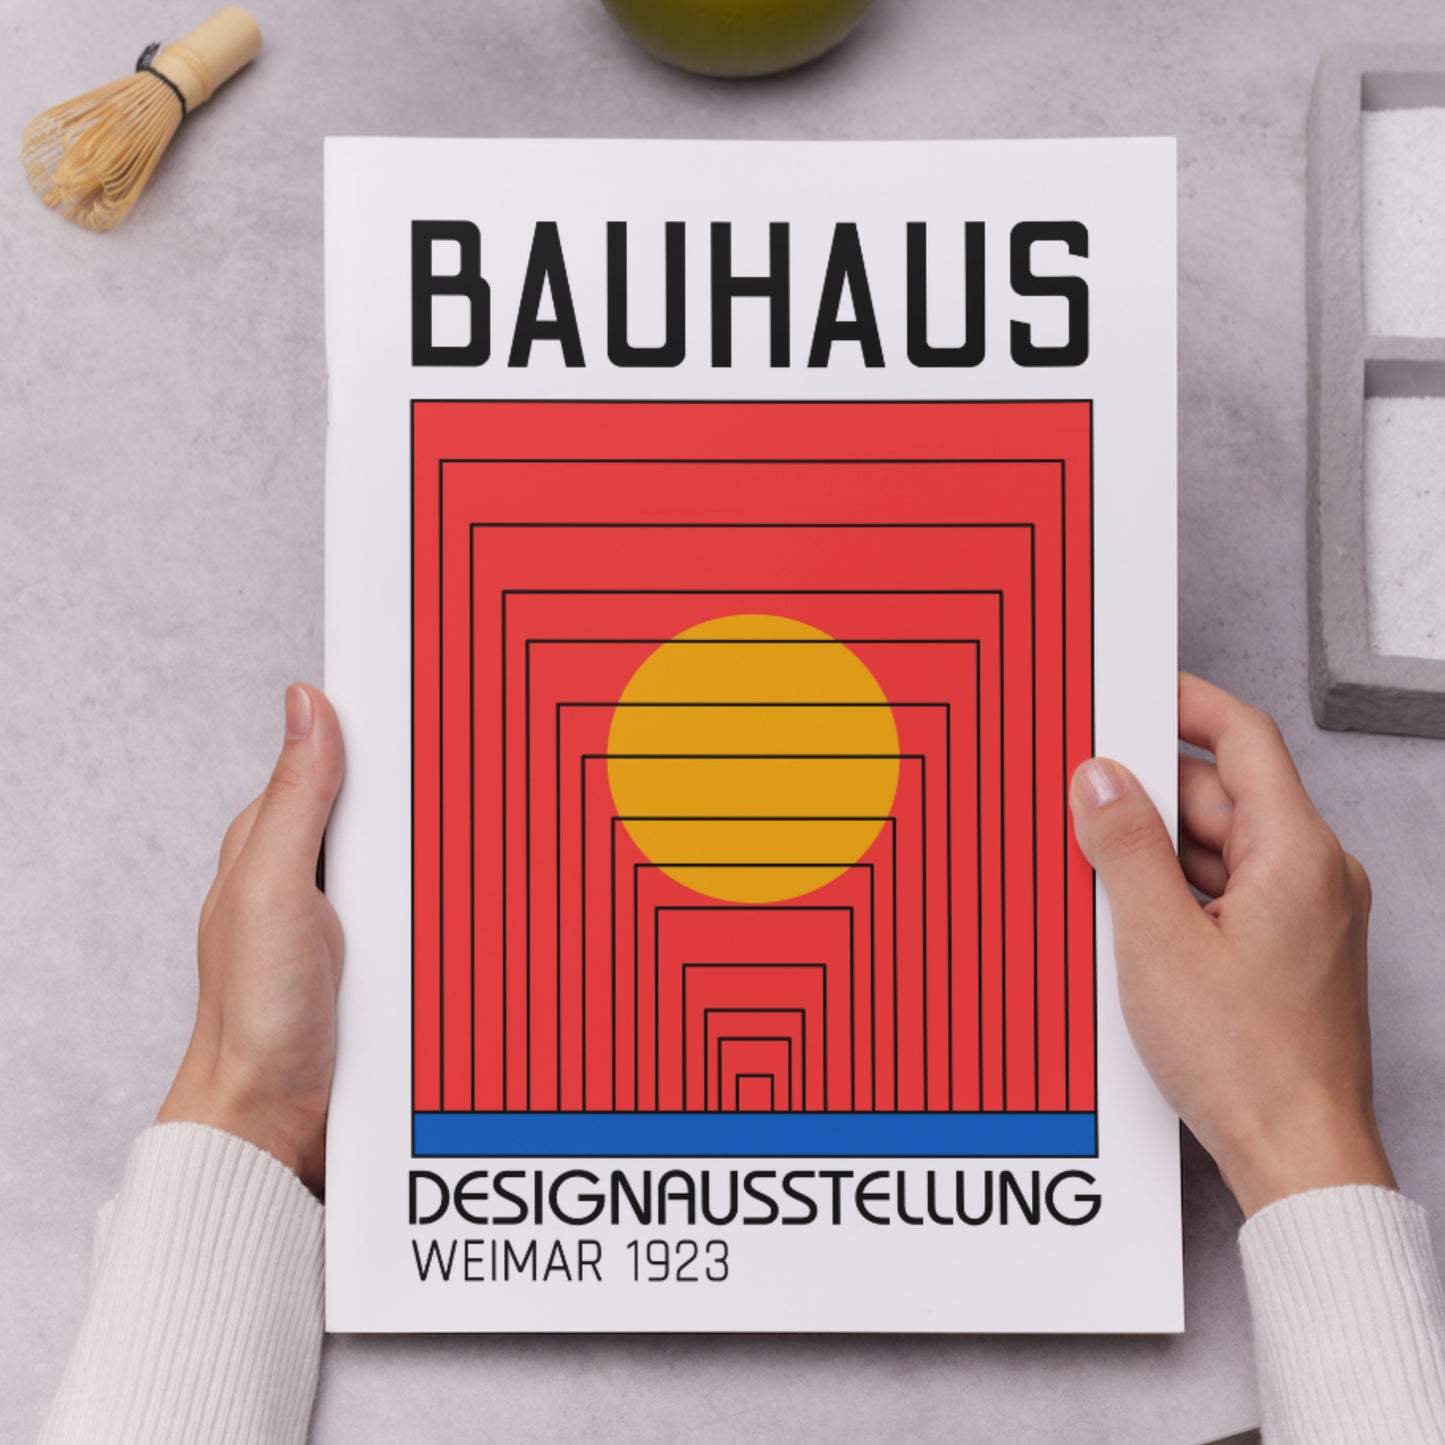 Bauhaus, Red and Yellow Exhibition Art Print, A3/A4/A5 Sizes